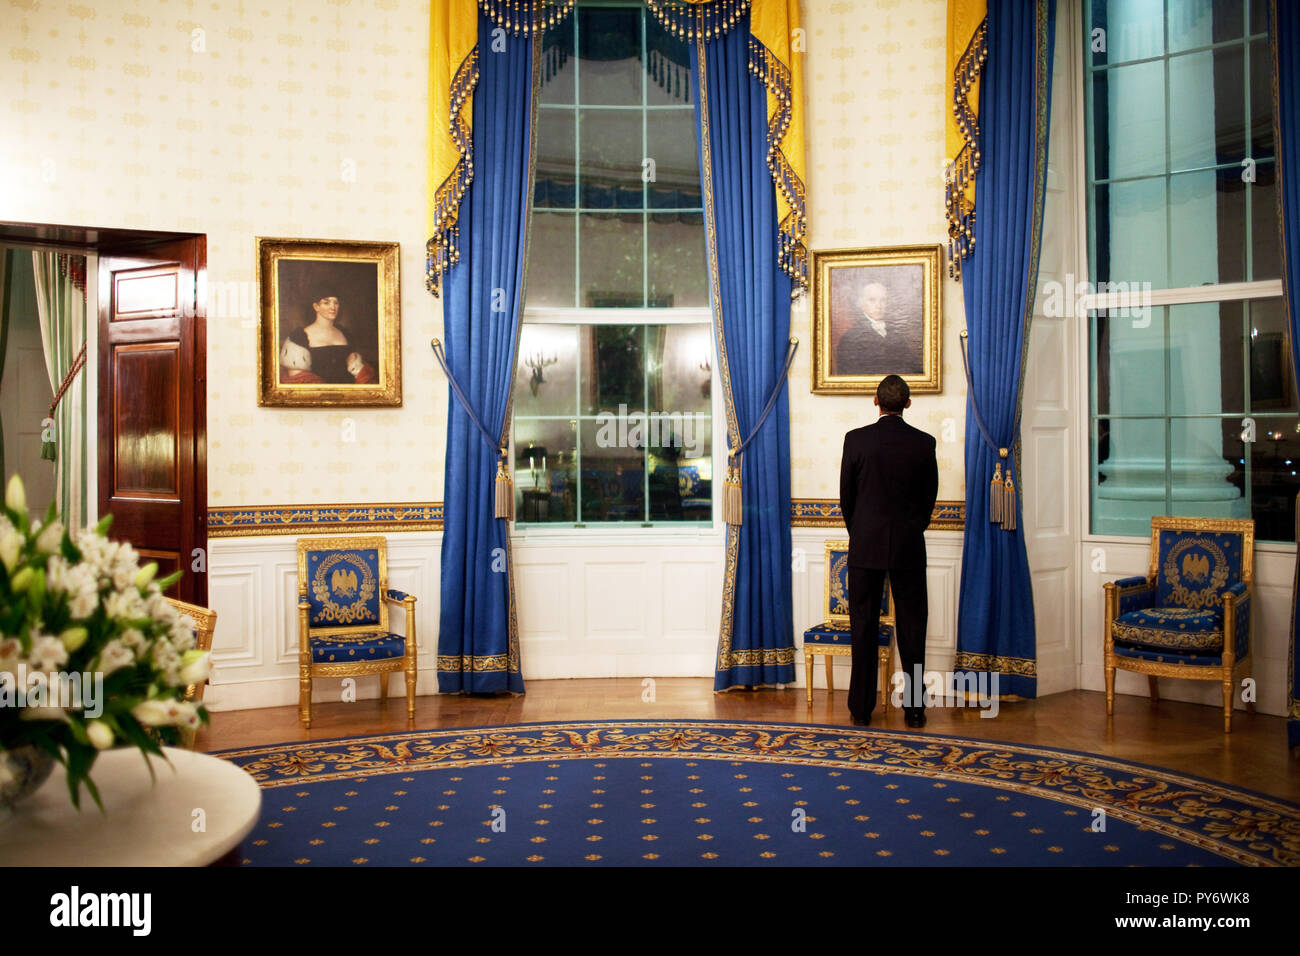 President Barack Obama looks at a portrait of President John Adams while waiting in the Blue Room prior to his press conference in the East Room 2/9/09. Official White House Photo by Pete Souza Stock Photo